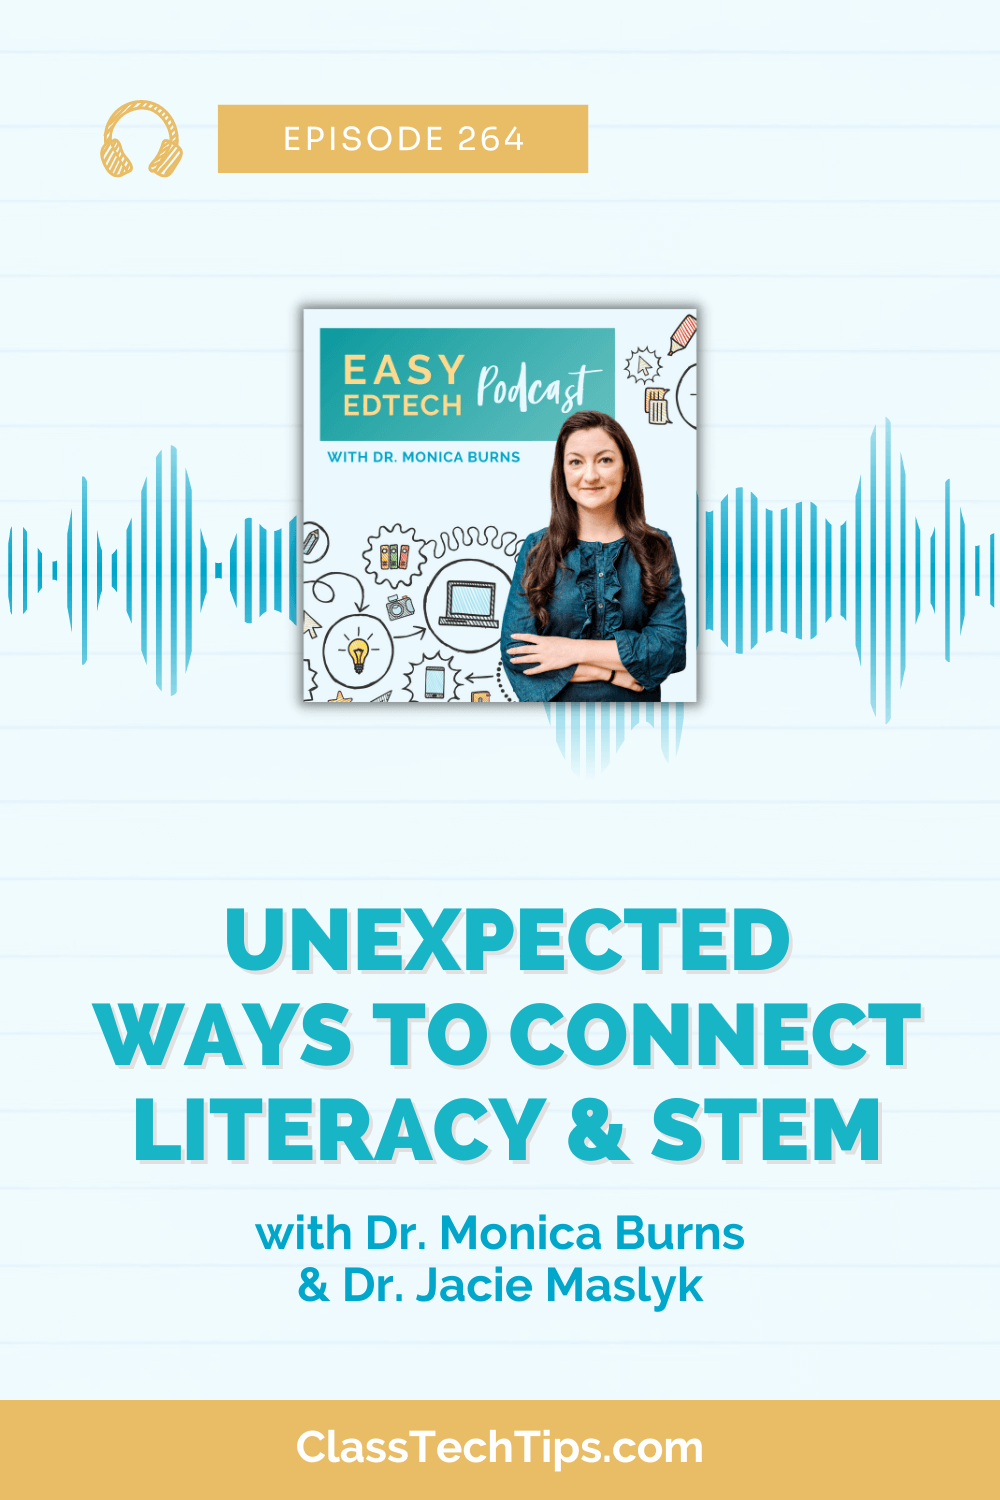 Promotional image for Easy EdTech Podcast Episode 264 featuring Dr. Monica Burns and Dr. Jacie Maslyk, with the title 'Unexpected Ways to Connect Literacy & STEM'.